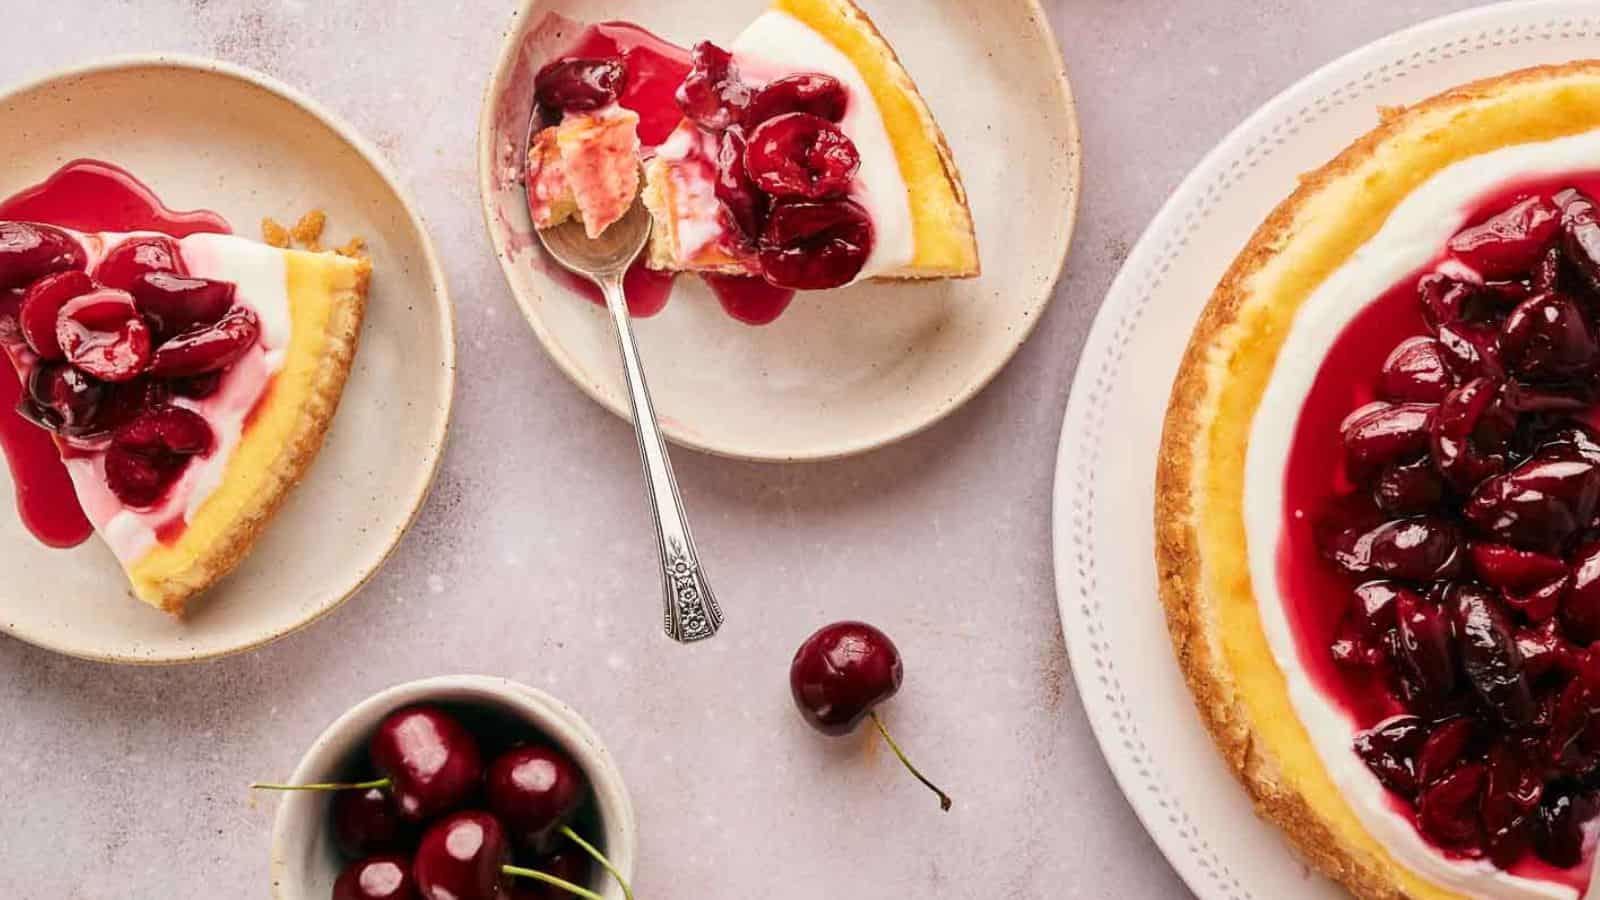 <p>Cherry Cheesecake is a dessert that dazzles without demanding too much effort. Creamy, sweet, and topped with juicy cherries. An indulgent treat that’s easy enough for anyone to create!<br><strong>Get the Recipe: </strong><a href="https://www.splashoftaste.com/cherry-cheesecake/?utm_source=msn&utm_medium=page&utm_campaign=msn">Cherry Cheesecake</a></p>